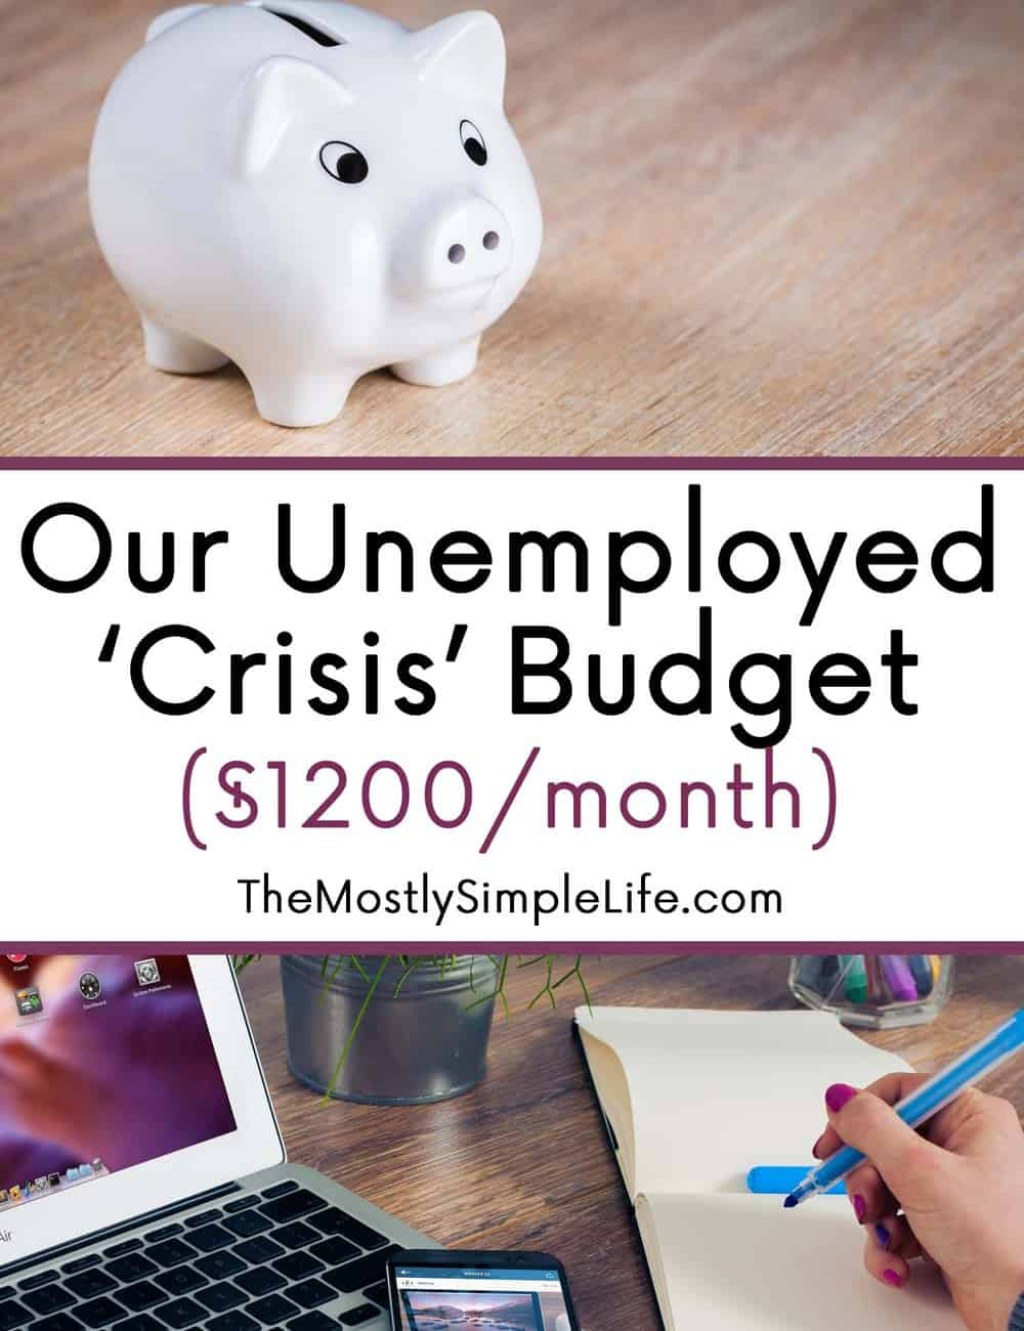 budgeting 1200 a month - Our Unemployed Budget: $ per month - The (mostly) Simple Life